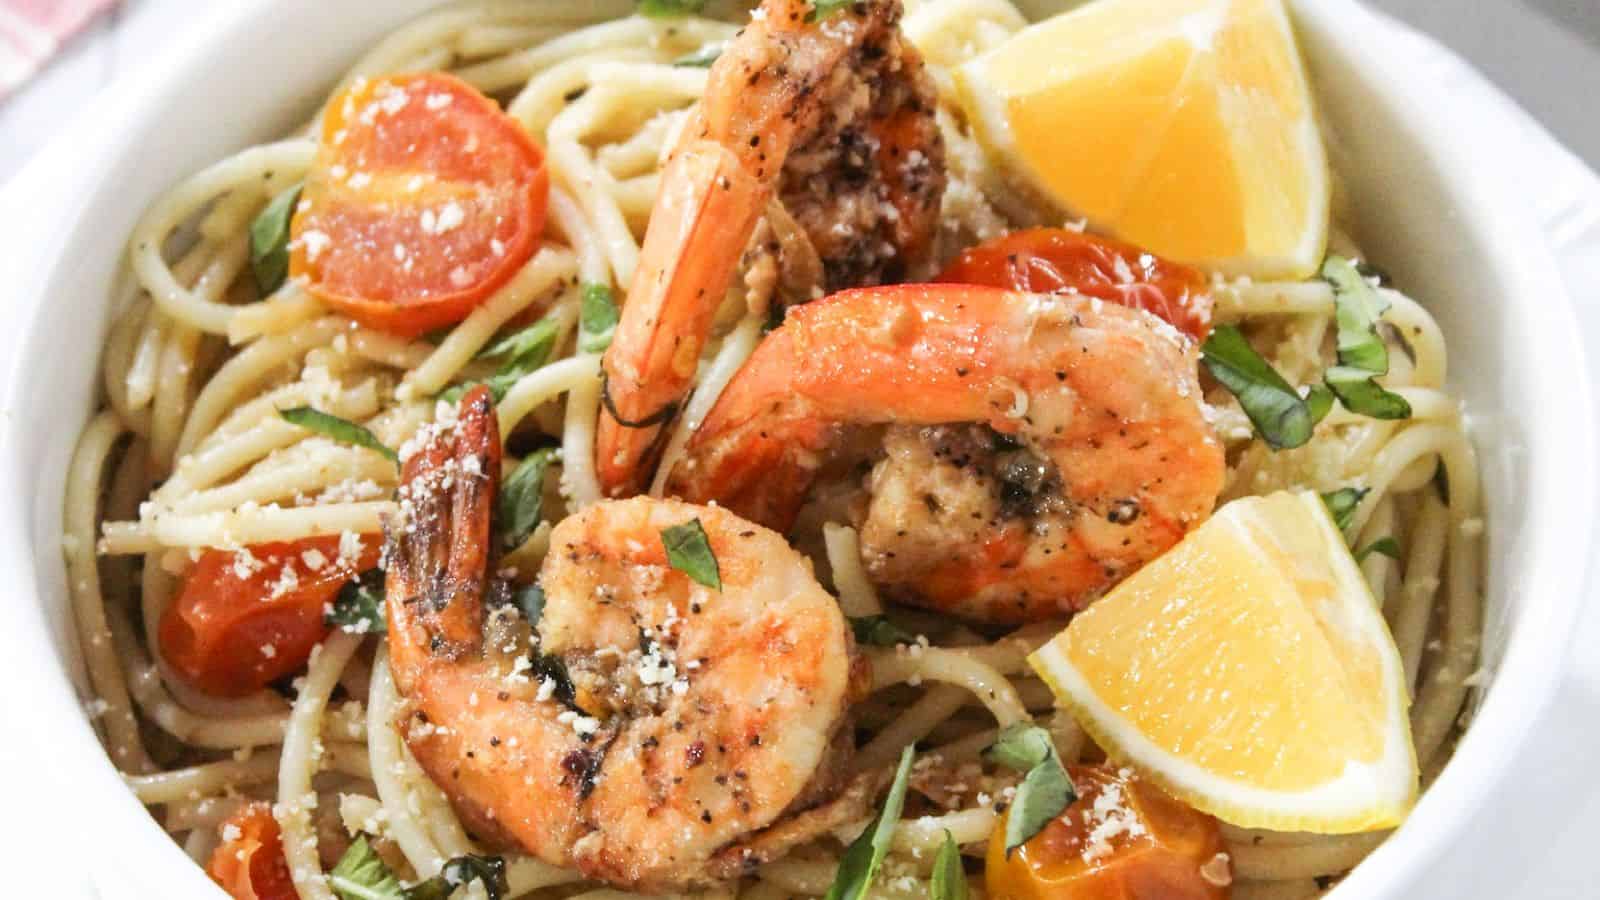 A bowl of pasta with shrimp and tomatoes.